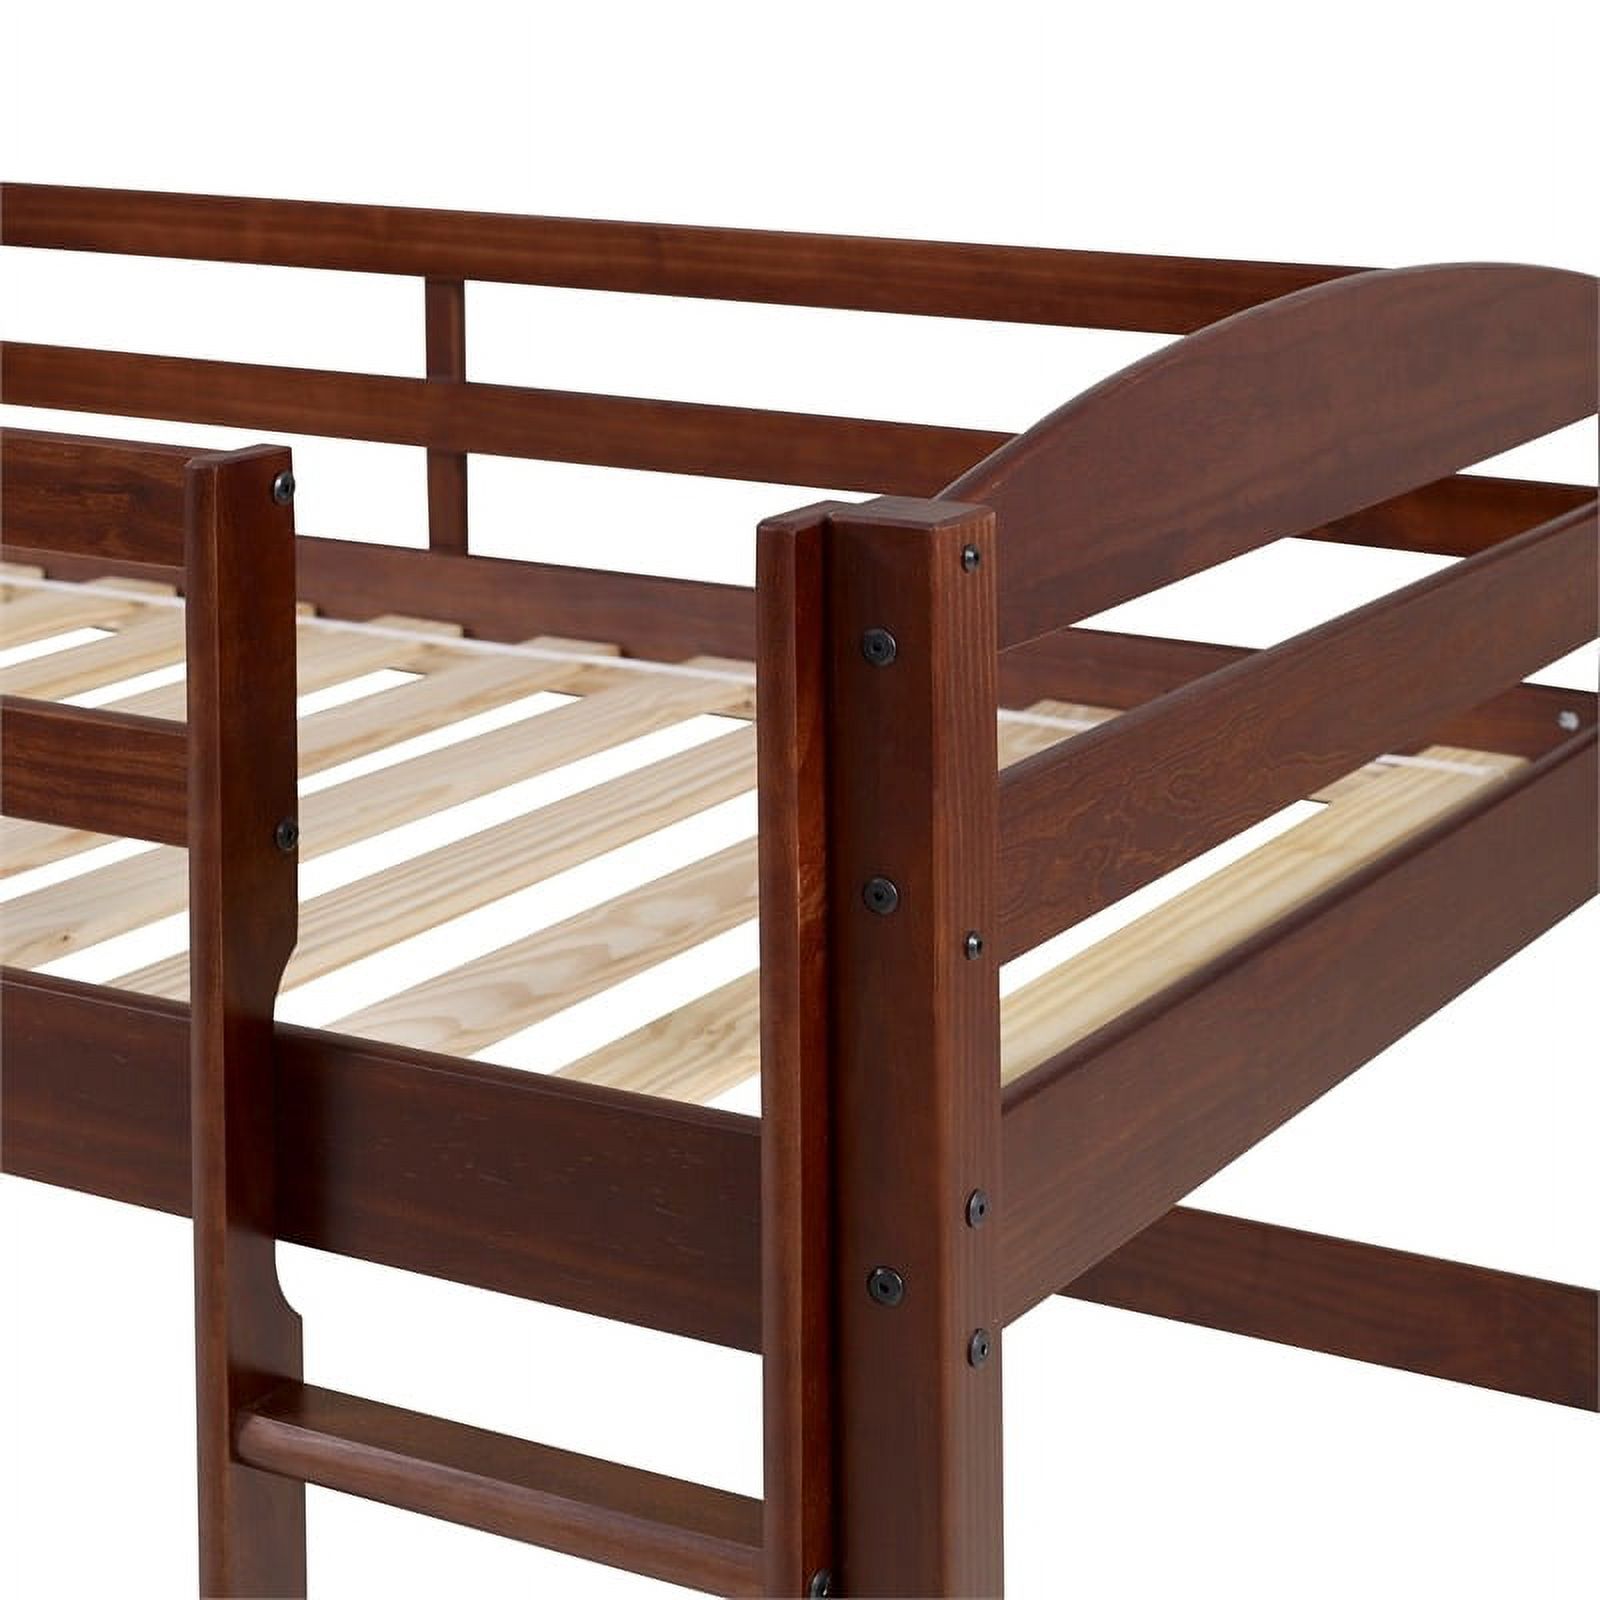 Pemberly Row Transitional Solid Wood Twin Low Loft Bed in Walnut Brown - image 4 of 10